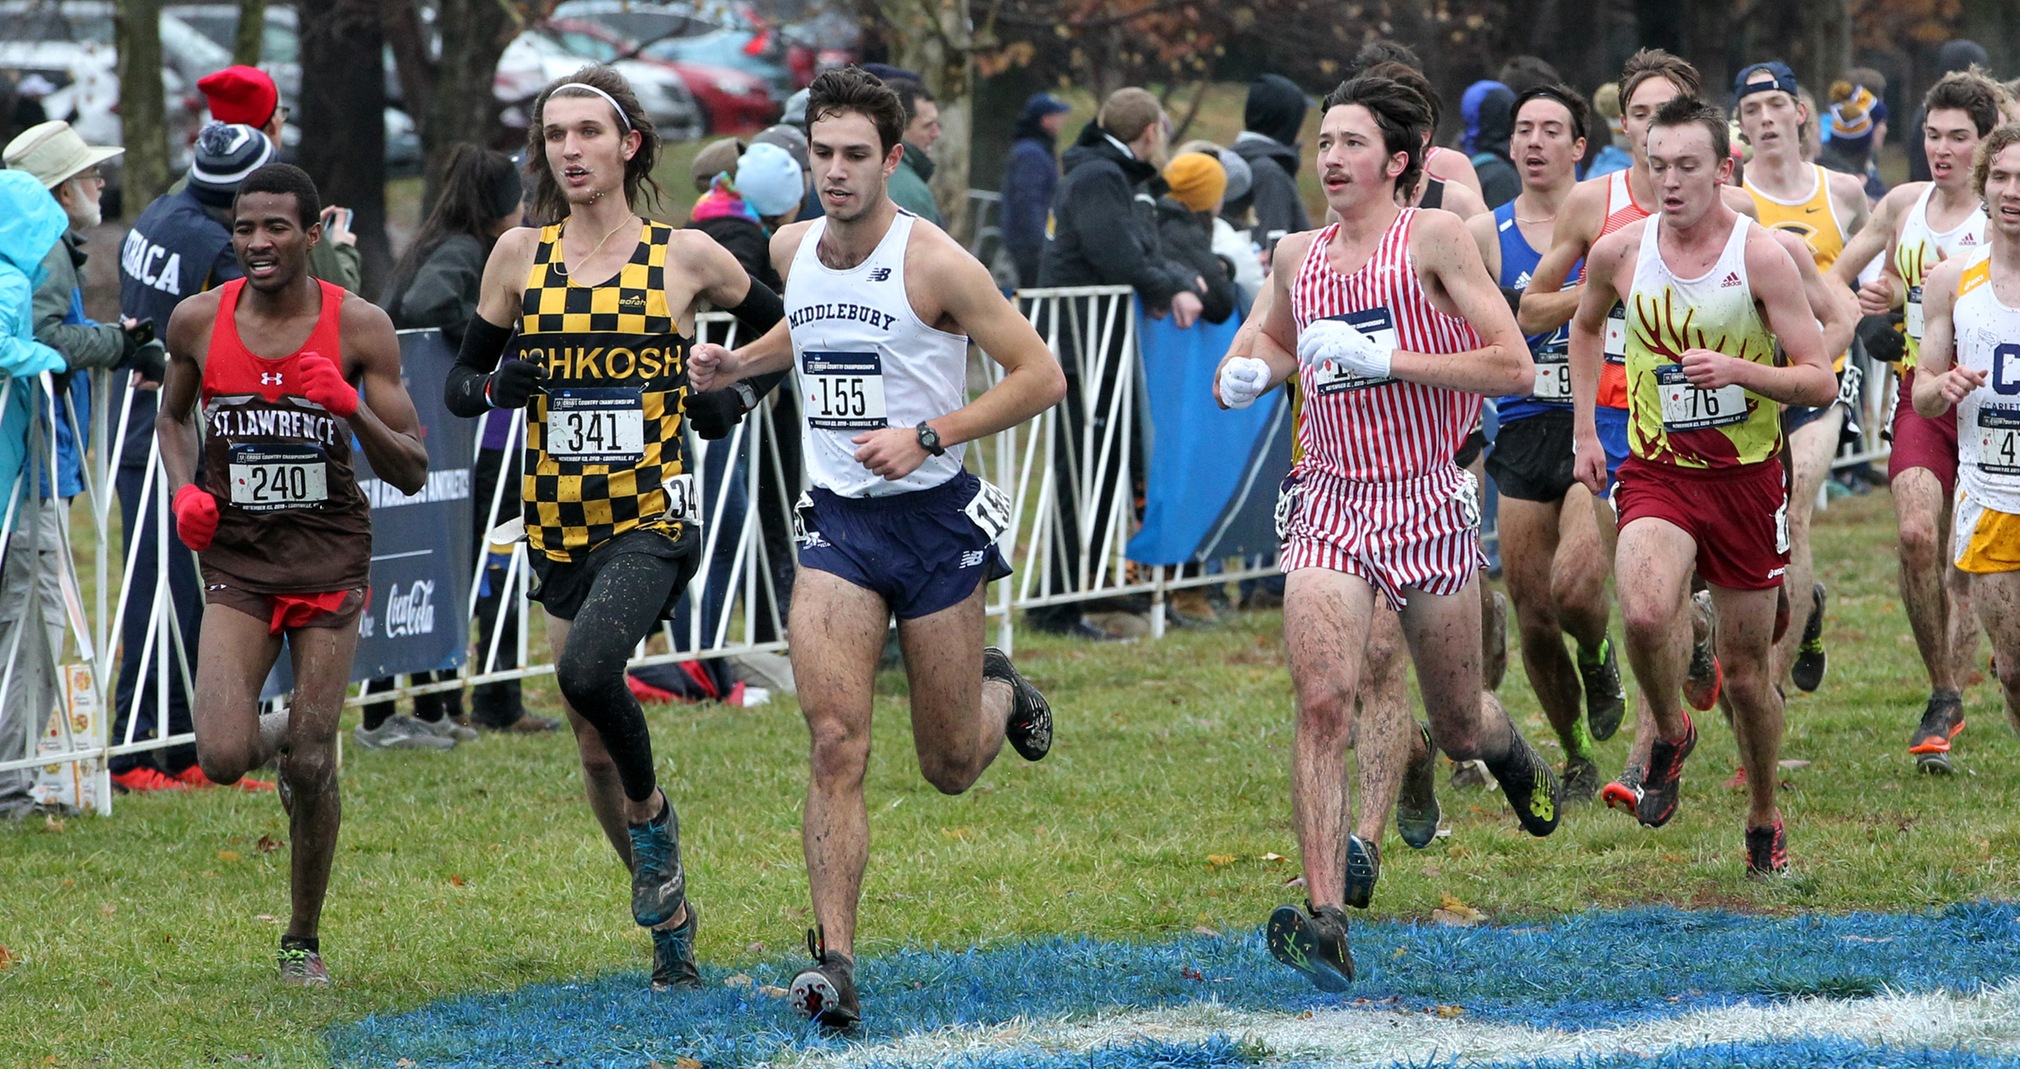 Cody Chadwick finished 21st at the NCAA Division III Championship for his first All-America award.